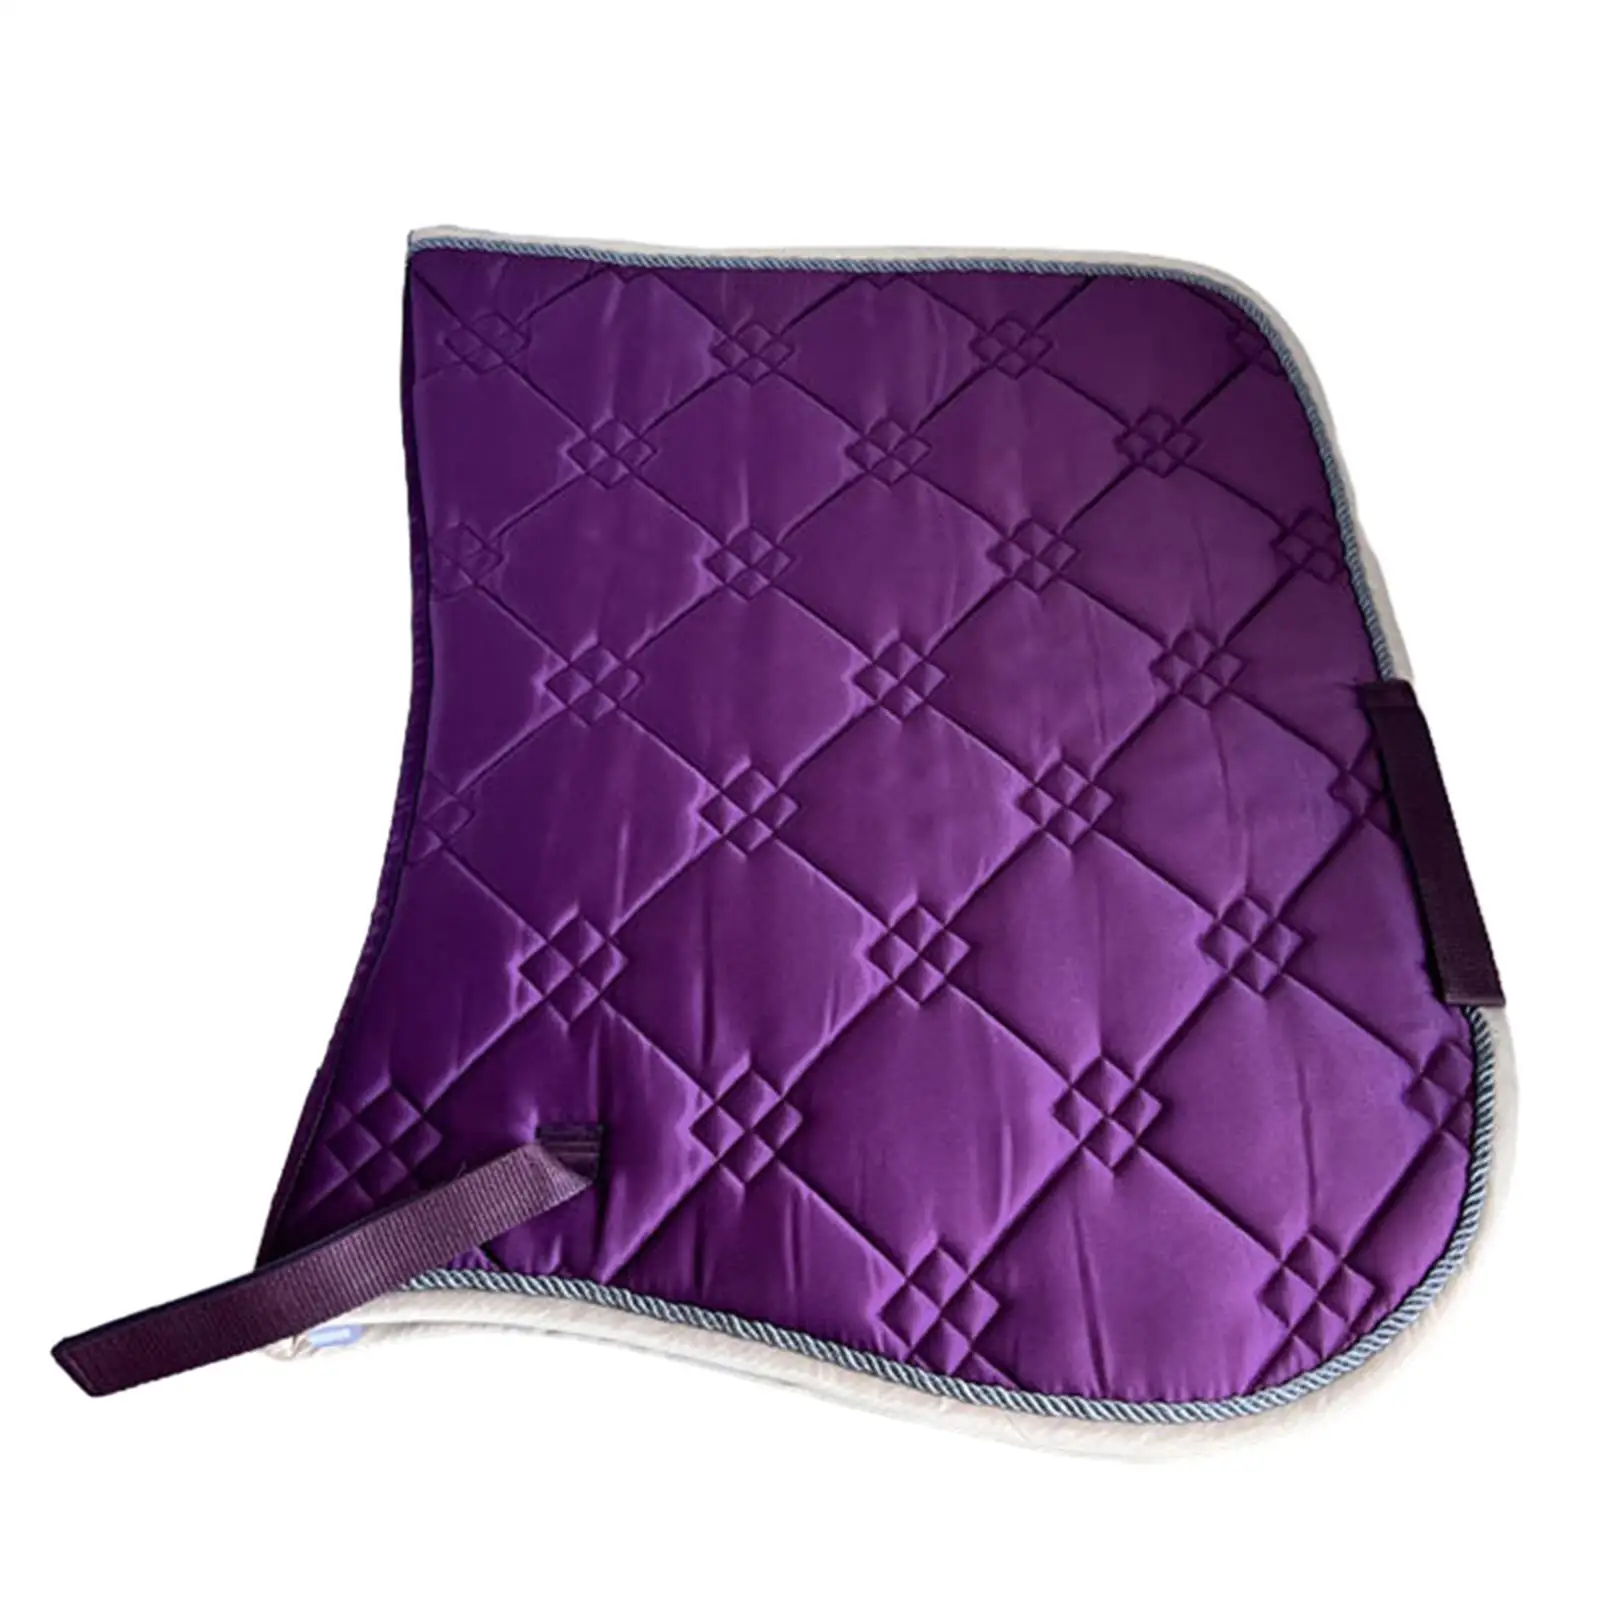 Horse Saddle Pad Comfortable Sponge Lining Padding Accessories Nonslip Breathable Shock Absorbing Riding Protection Dressage Pad